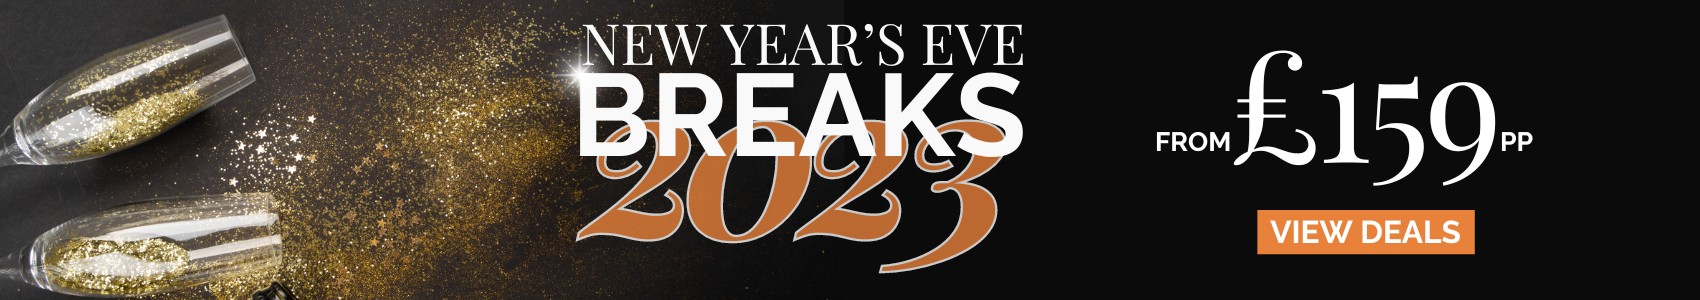 new year's eve breaks 2023 from £159 per person. Click here to view deals.